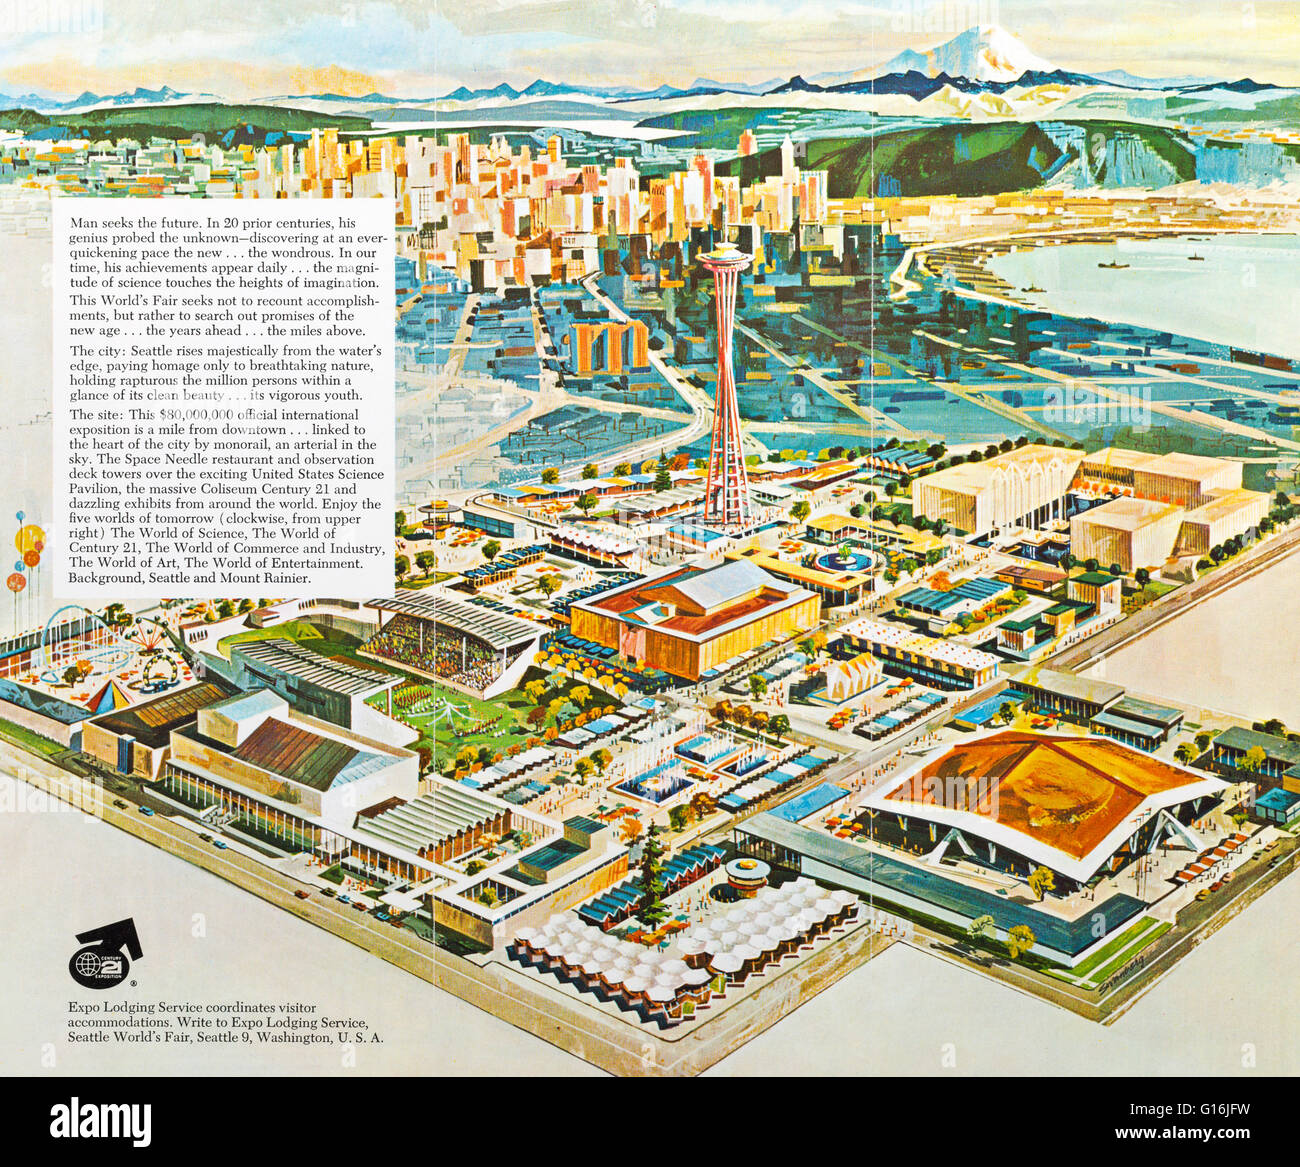 Artist's rendering of the 1962 Seattle World's Fair in a tourist brochure Stock Photo